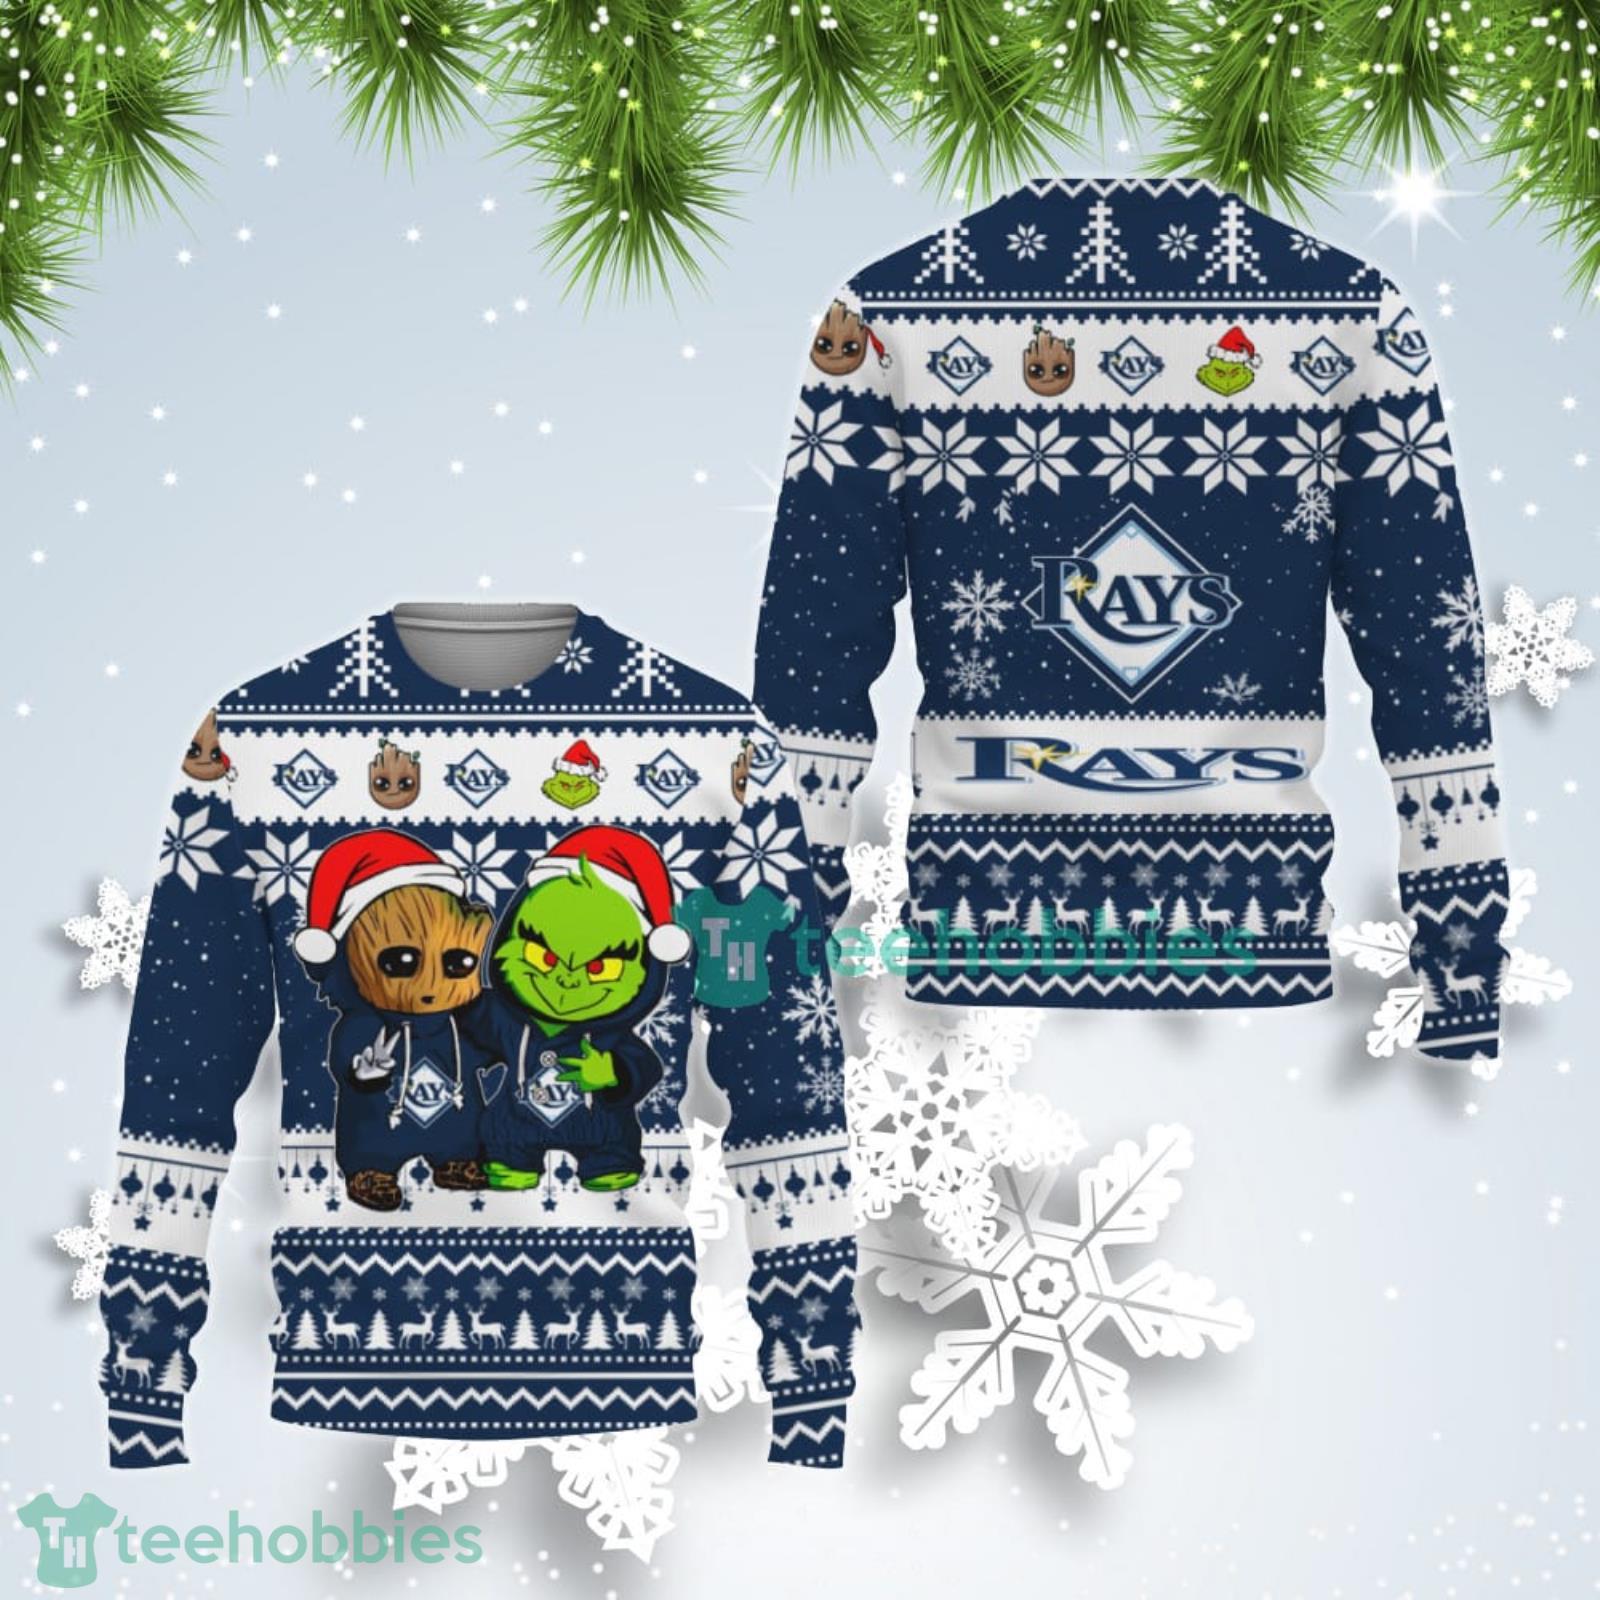 Tampa Bay Rays Baby Groot And Grinch Best Friends Ugly Christmas Sweater Product Photo 1